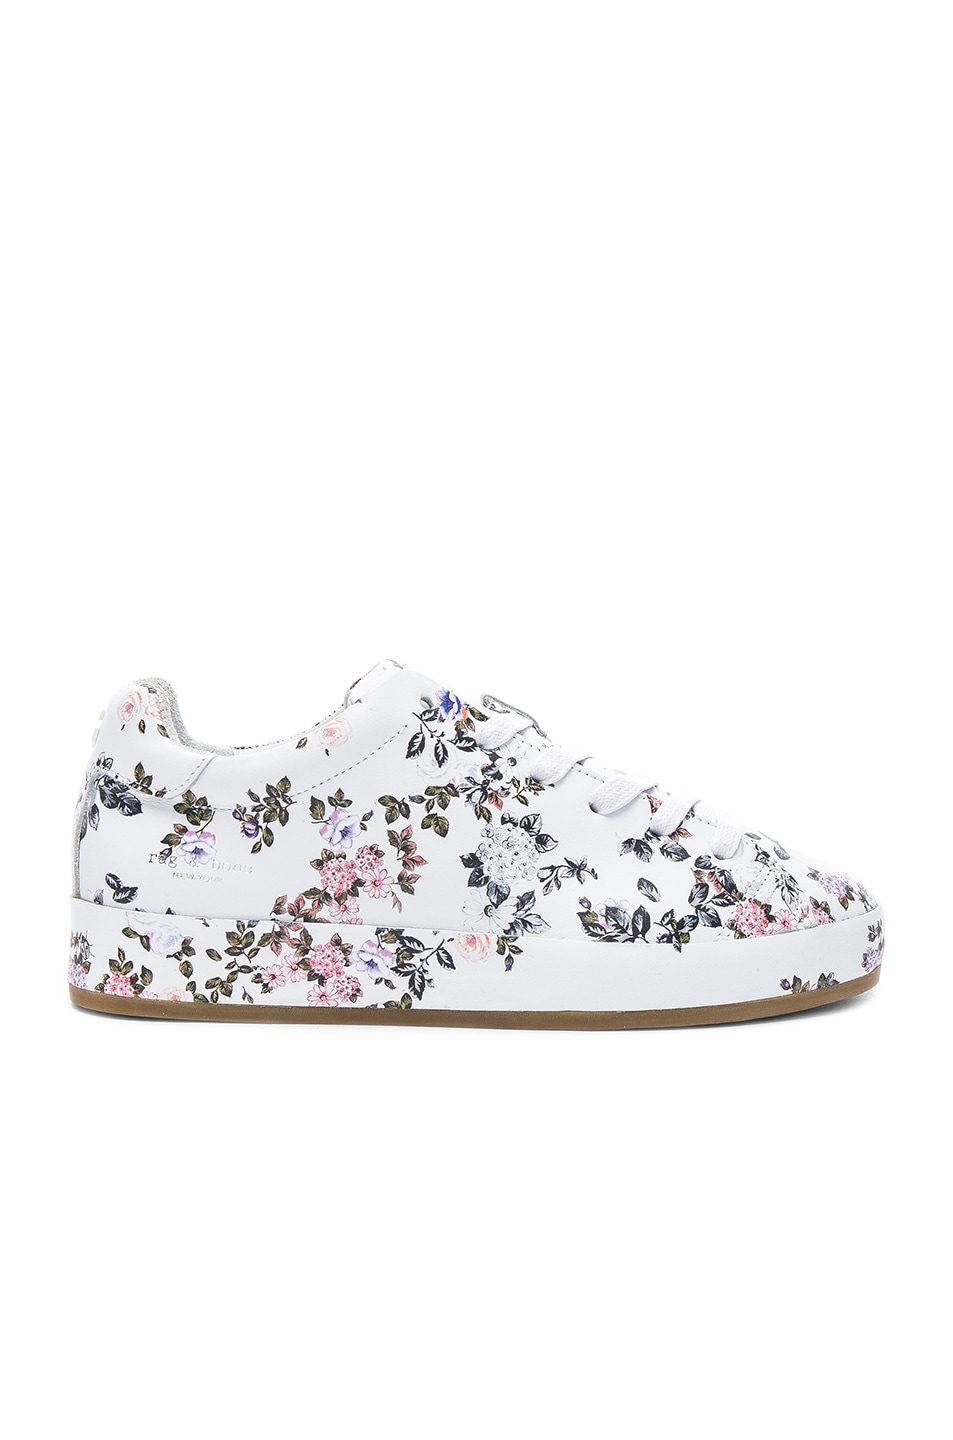 Image 1 of Rag & Bone Leather RB1 Low Sneakers in Garden Floral